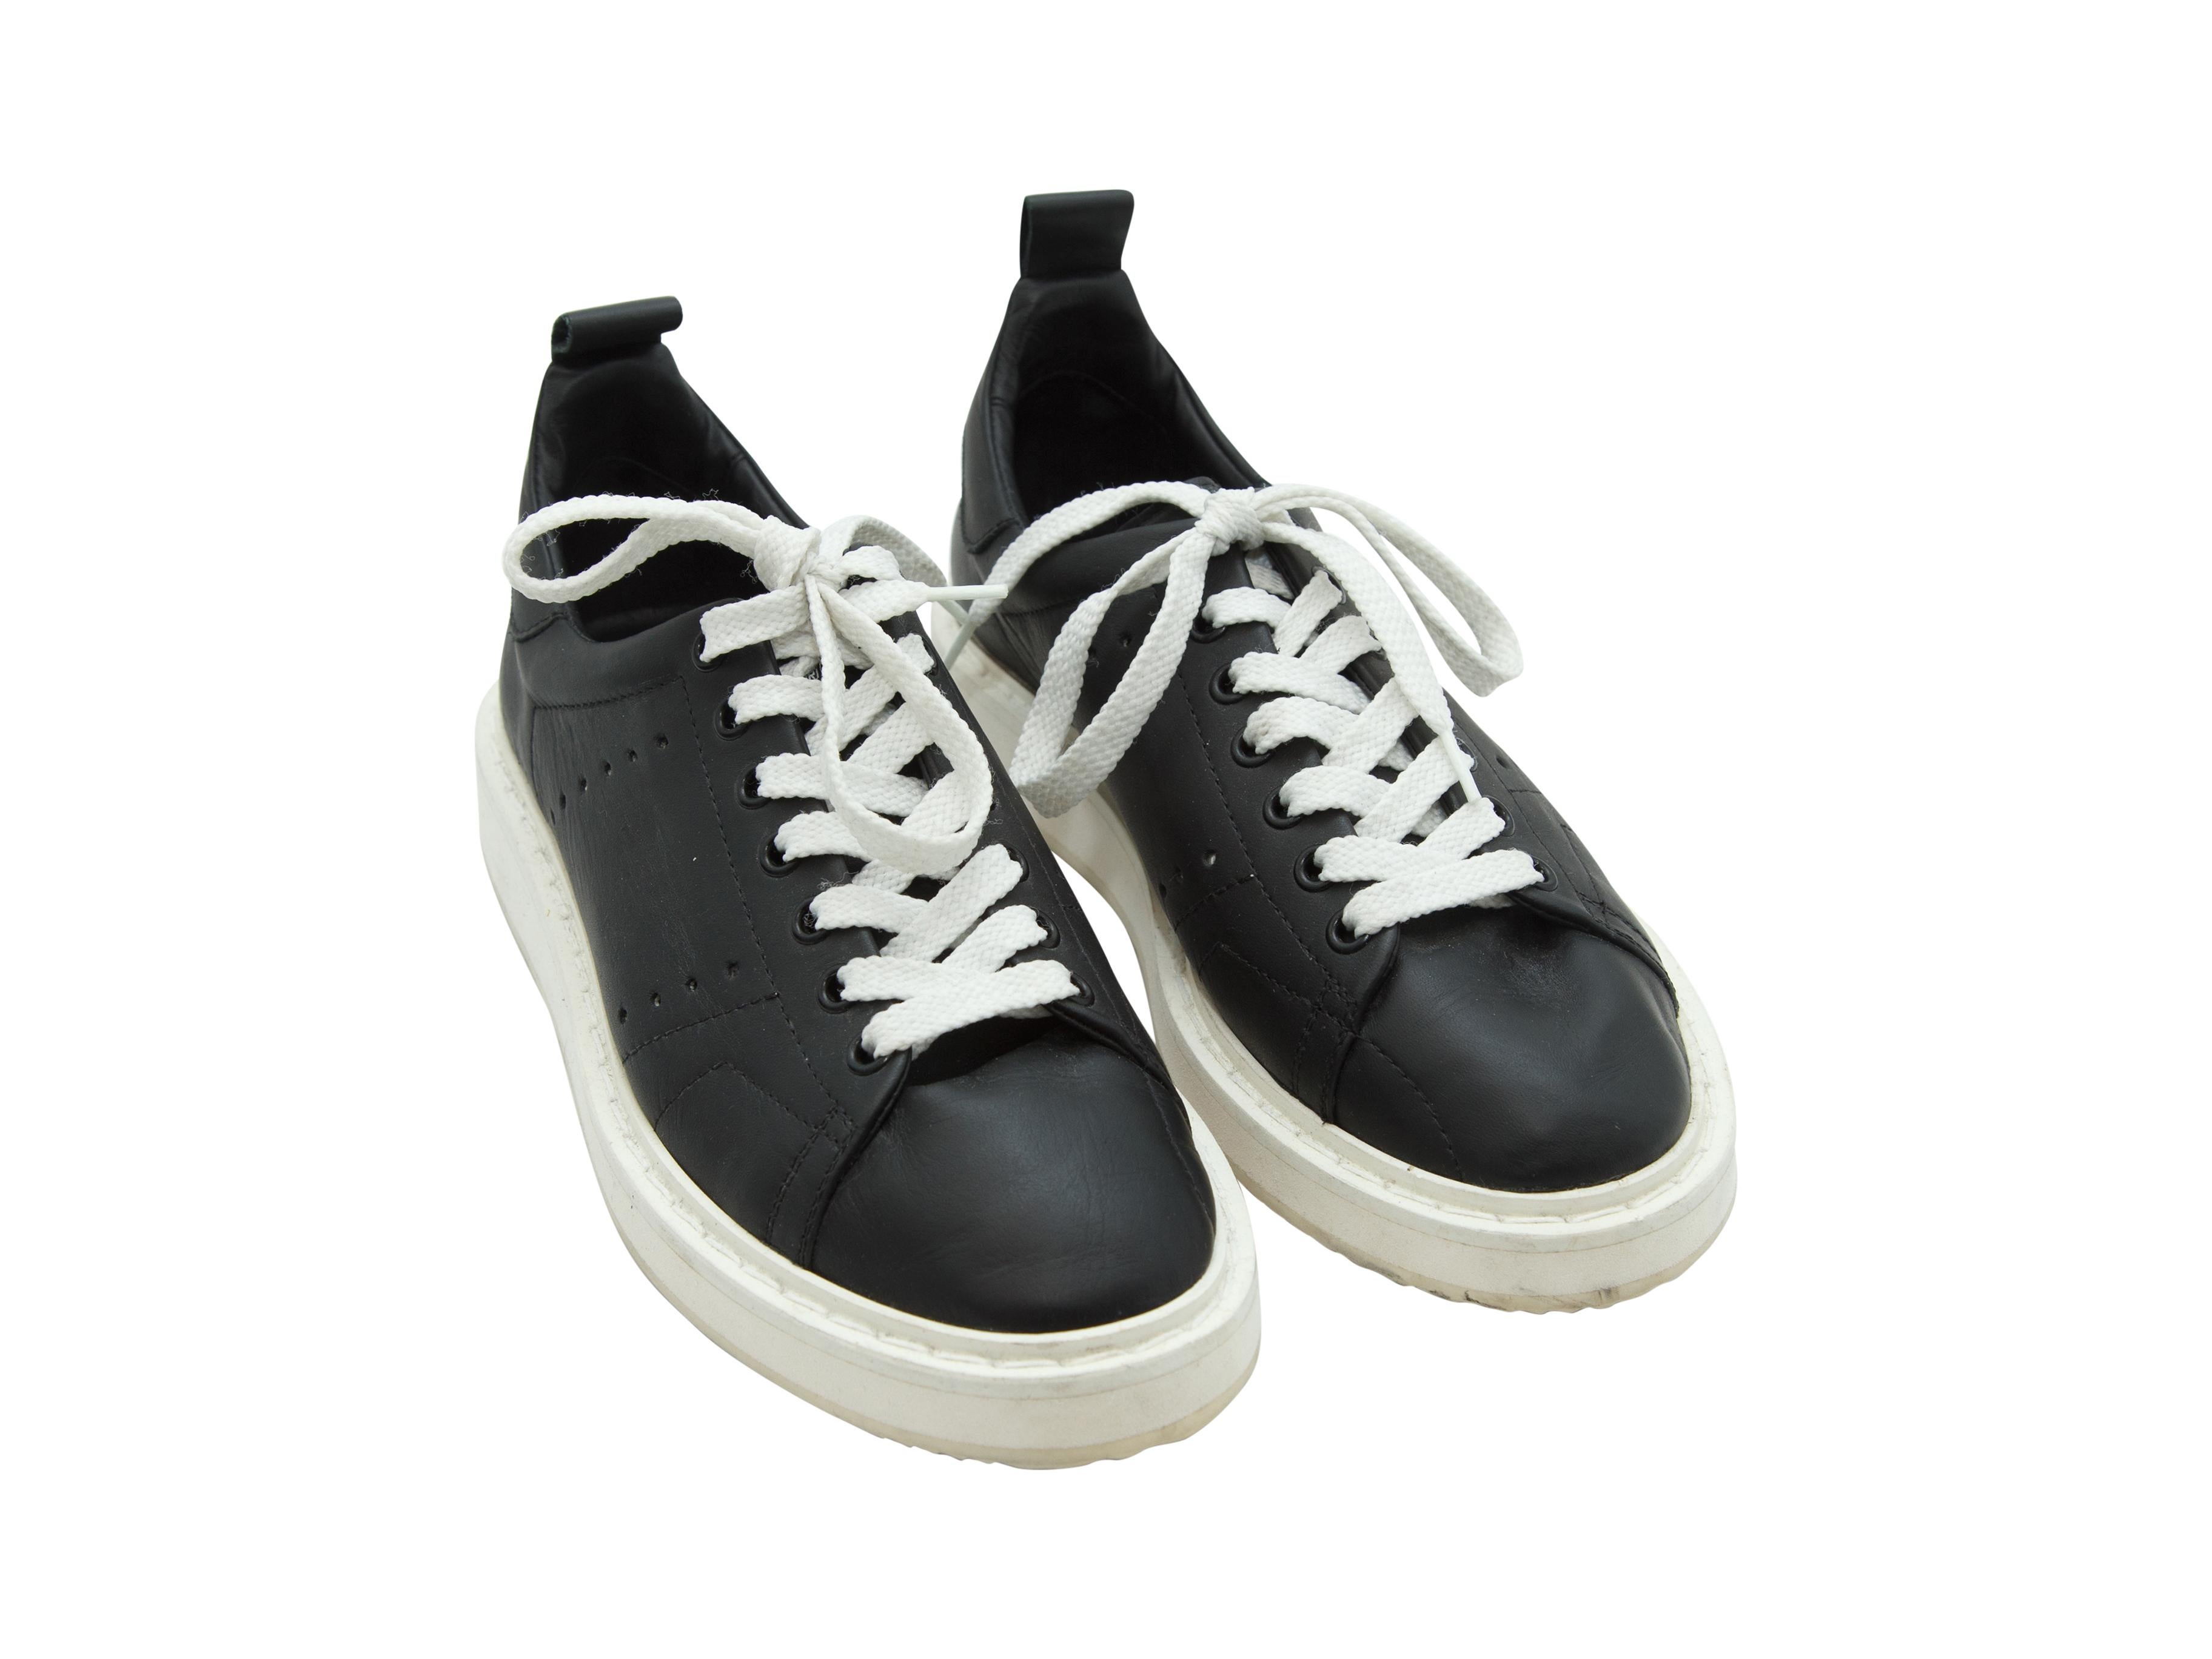 Product details:  Black leather sneakers by Golden Goose Deluxe Brand.  Lace-up closure.  Round toe.  
Condition: Pre-owned. Very good. 
Est. Retail $ 895.00